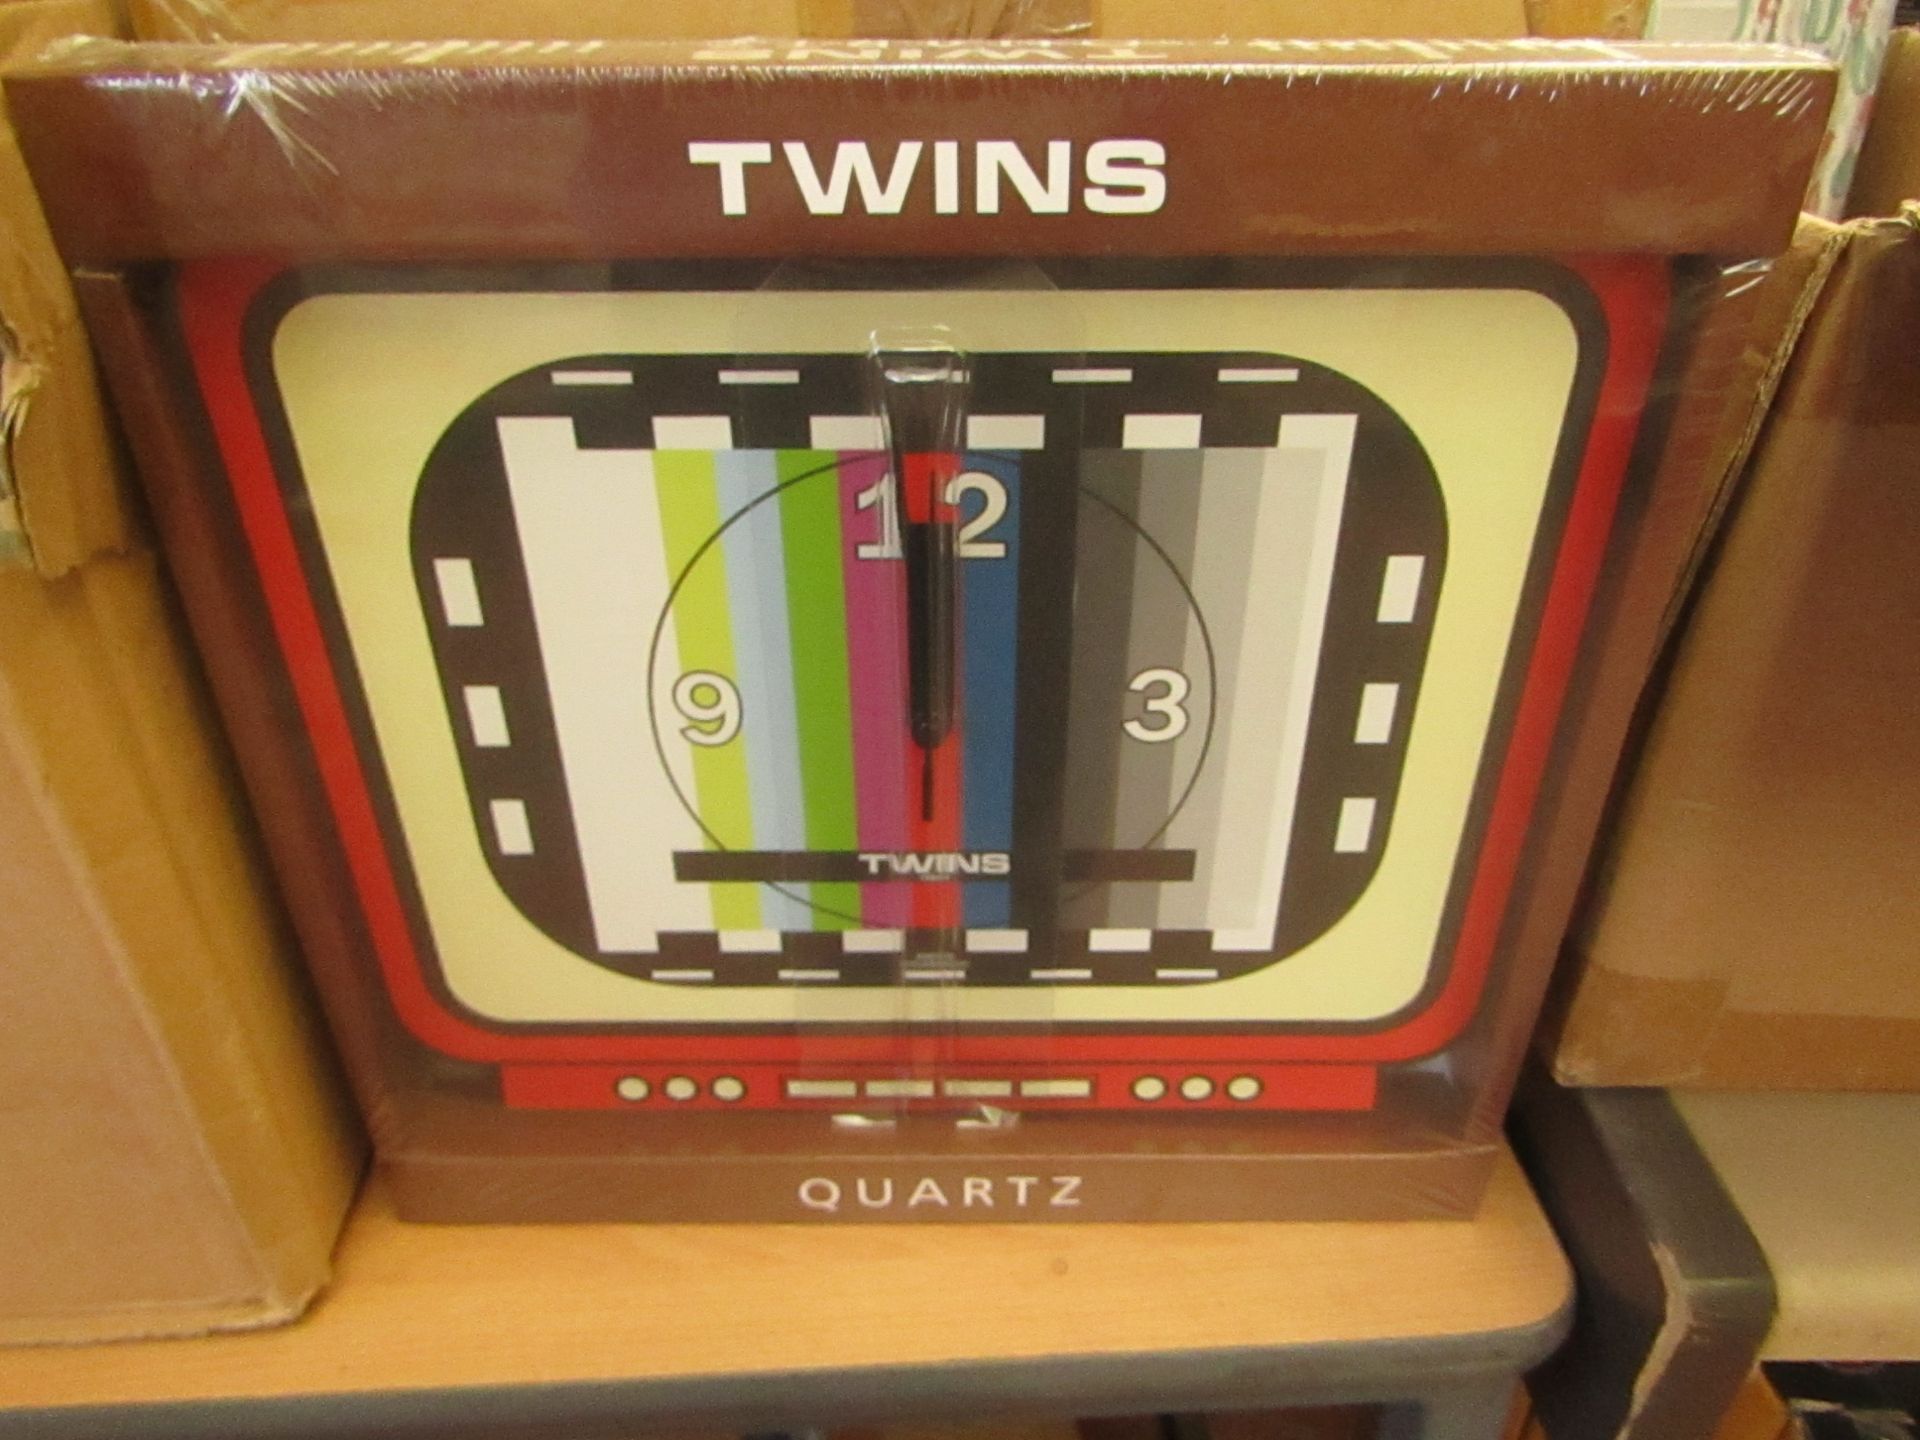 4 x Twins Quartz Wall Clocks new & packaged see image for design